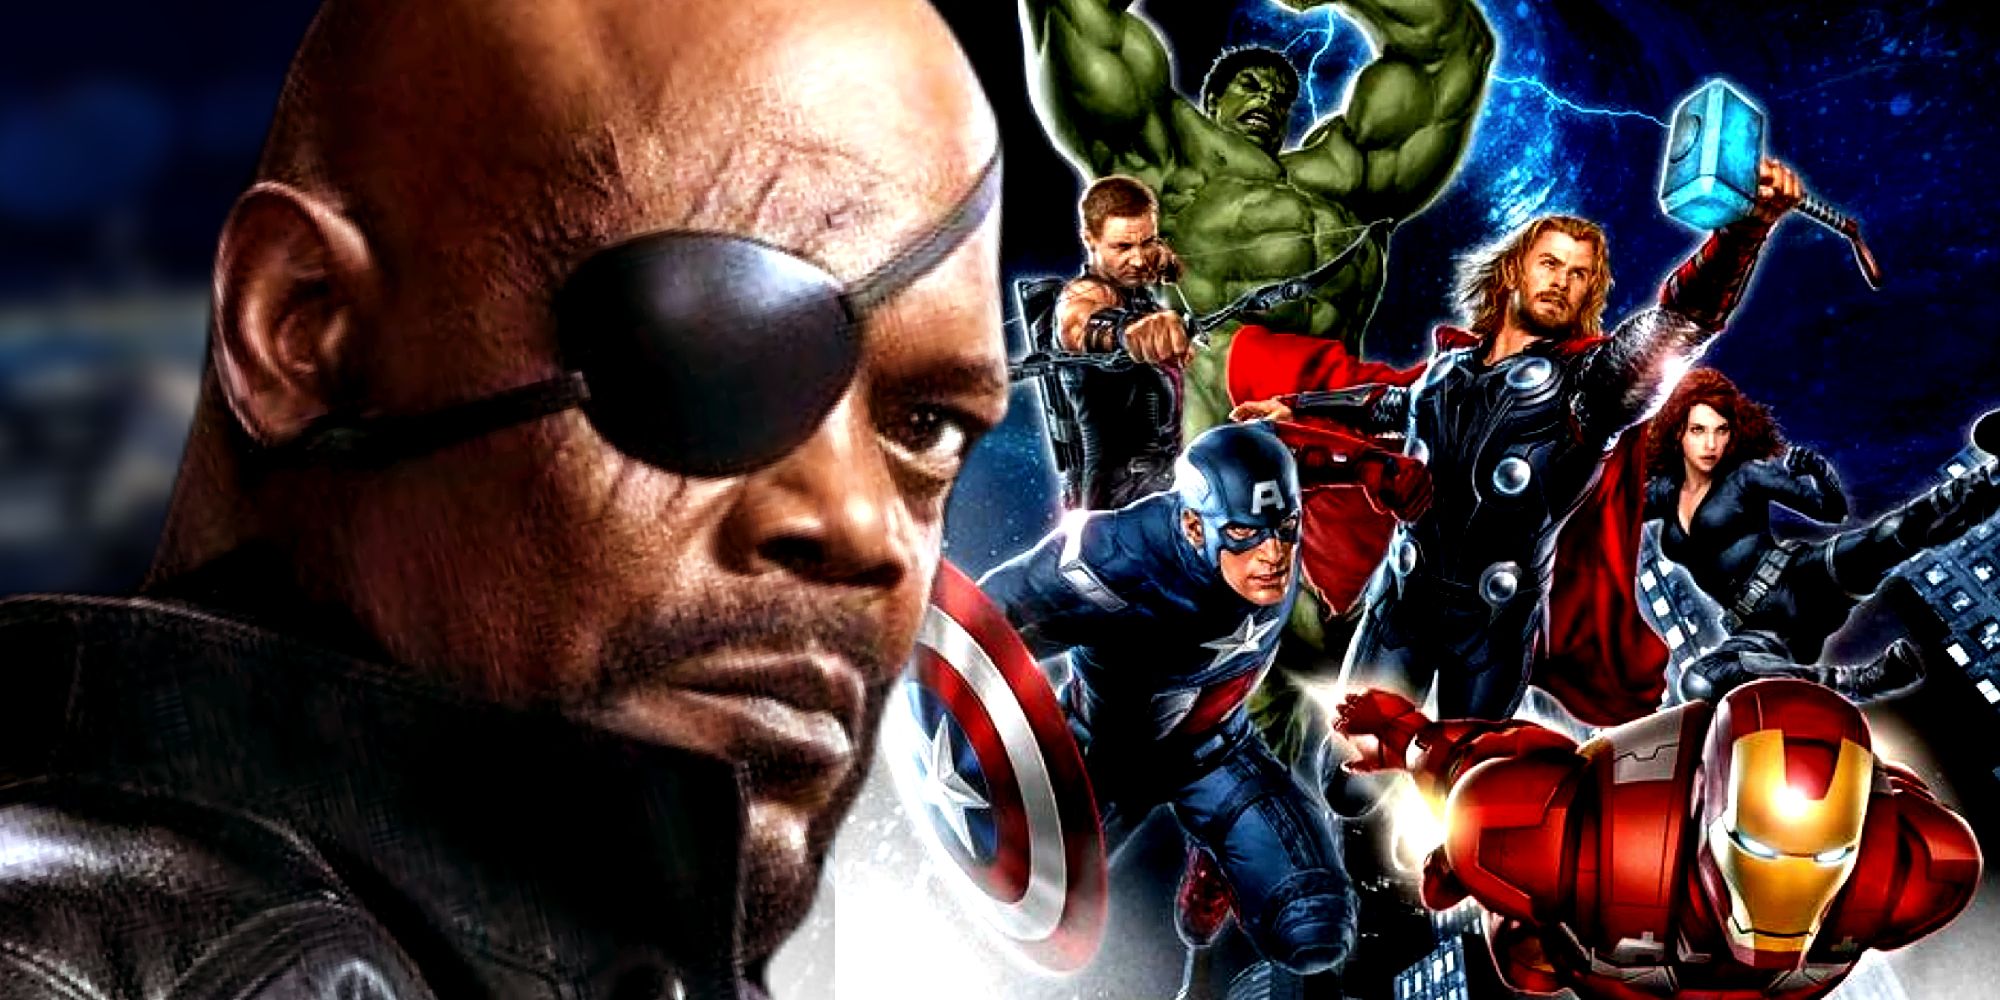 Nick Fury and the Avengers in the MCU